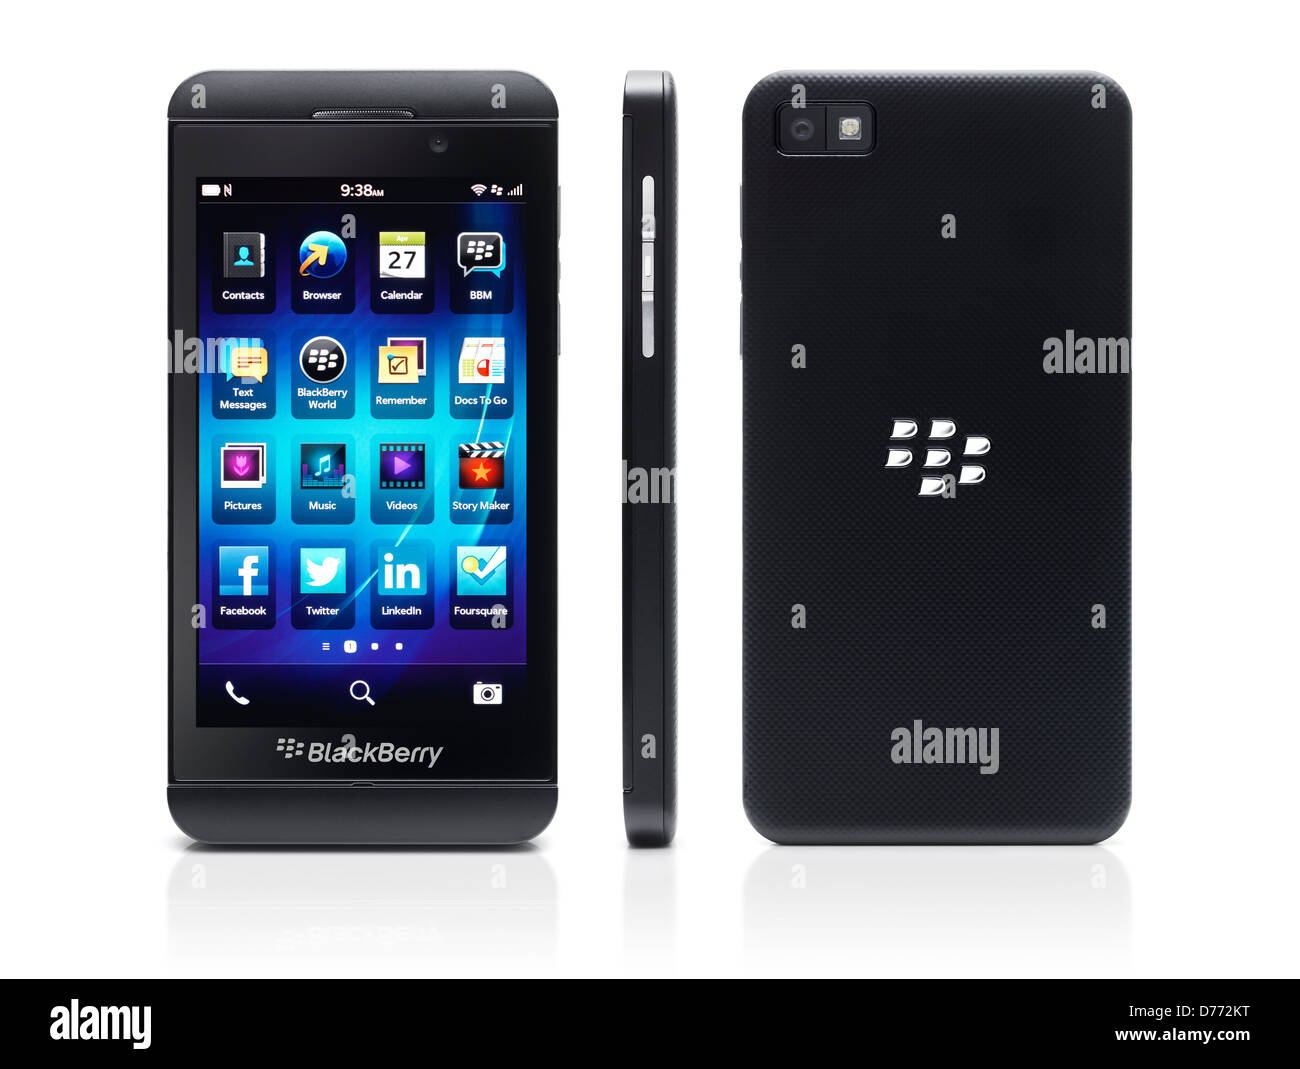 Blackberry Z10 smartphone three views front, back and side. Black phone isolated on white background Stock Photo